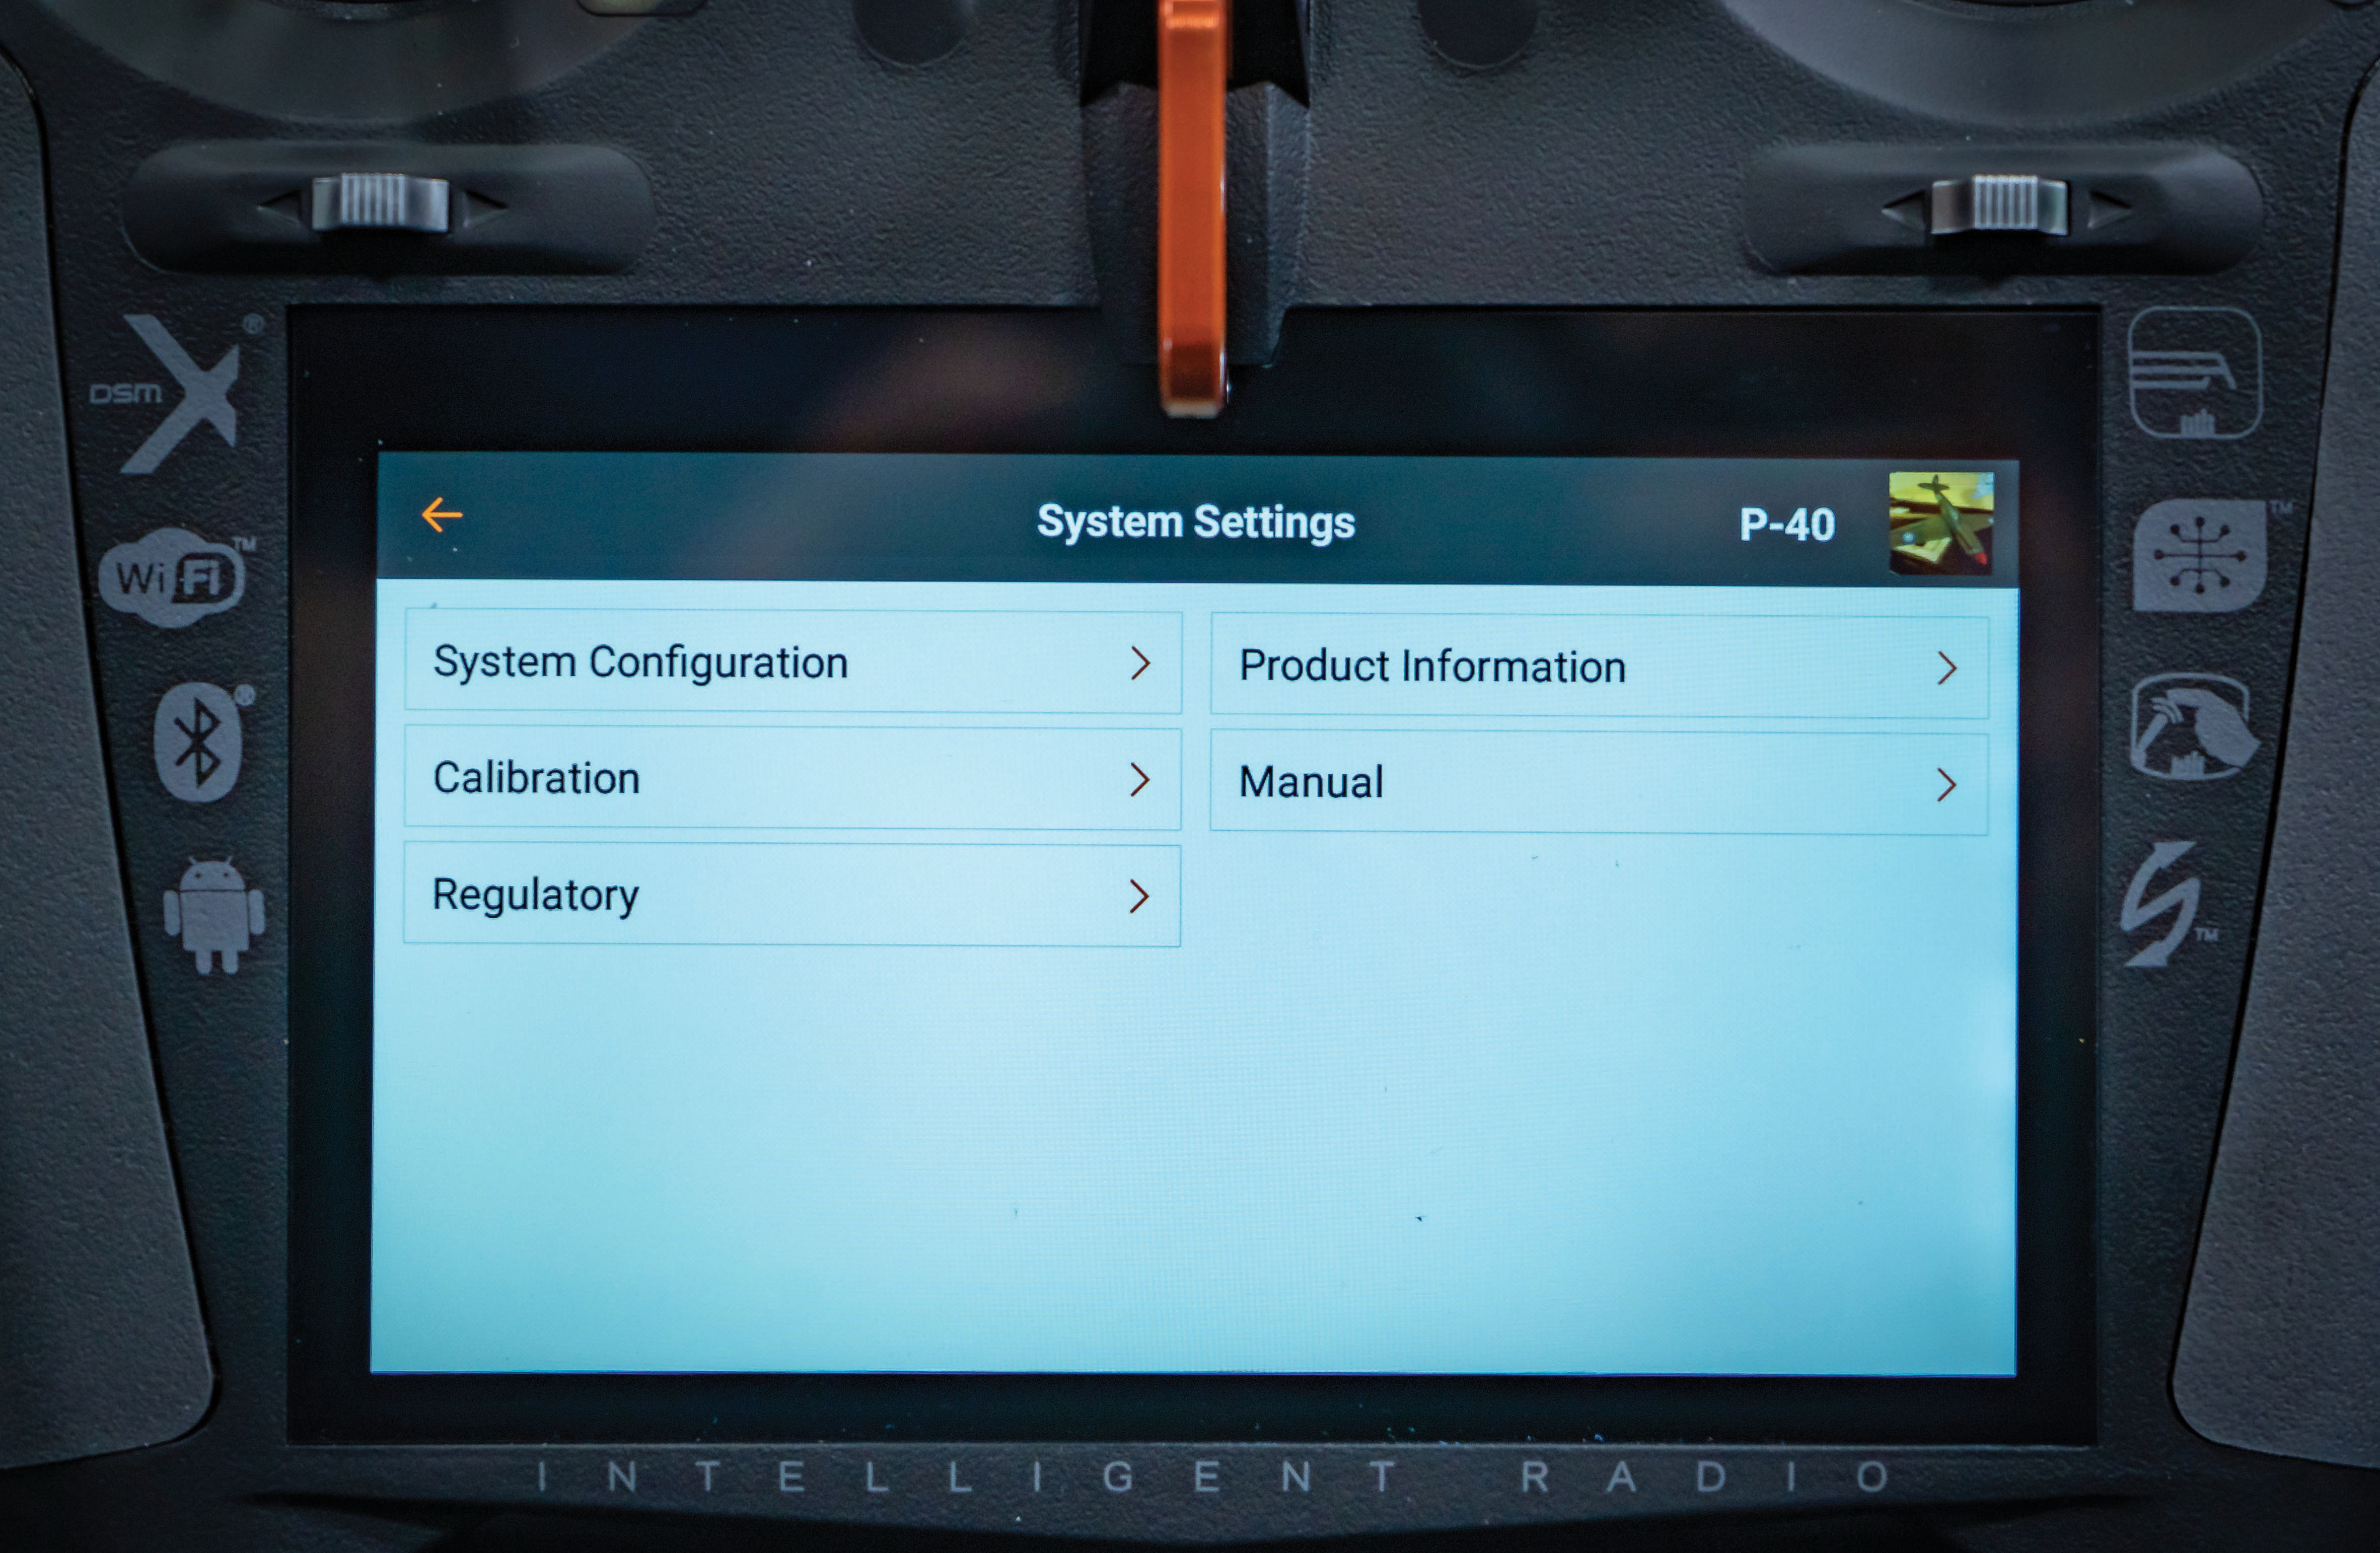 the system settings menu is accessed from any of the main screens by touching the system